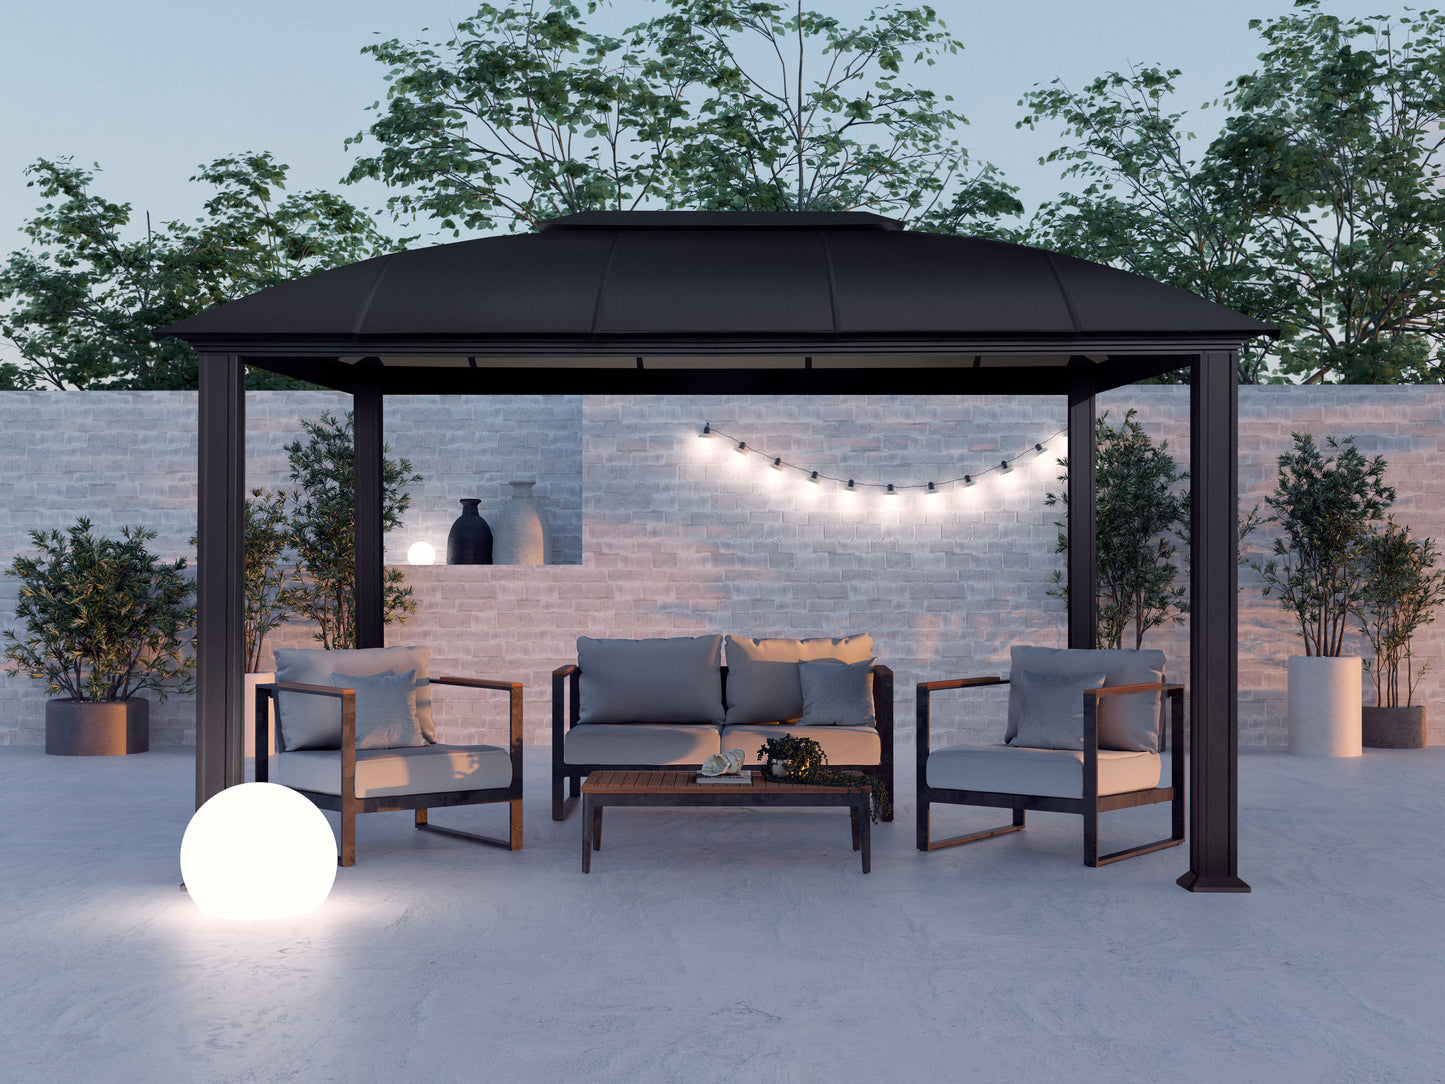 Cambridge Hard Top Gazebo at dusk with patio furniture and outdoor lighting underneath.